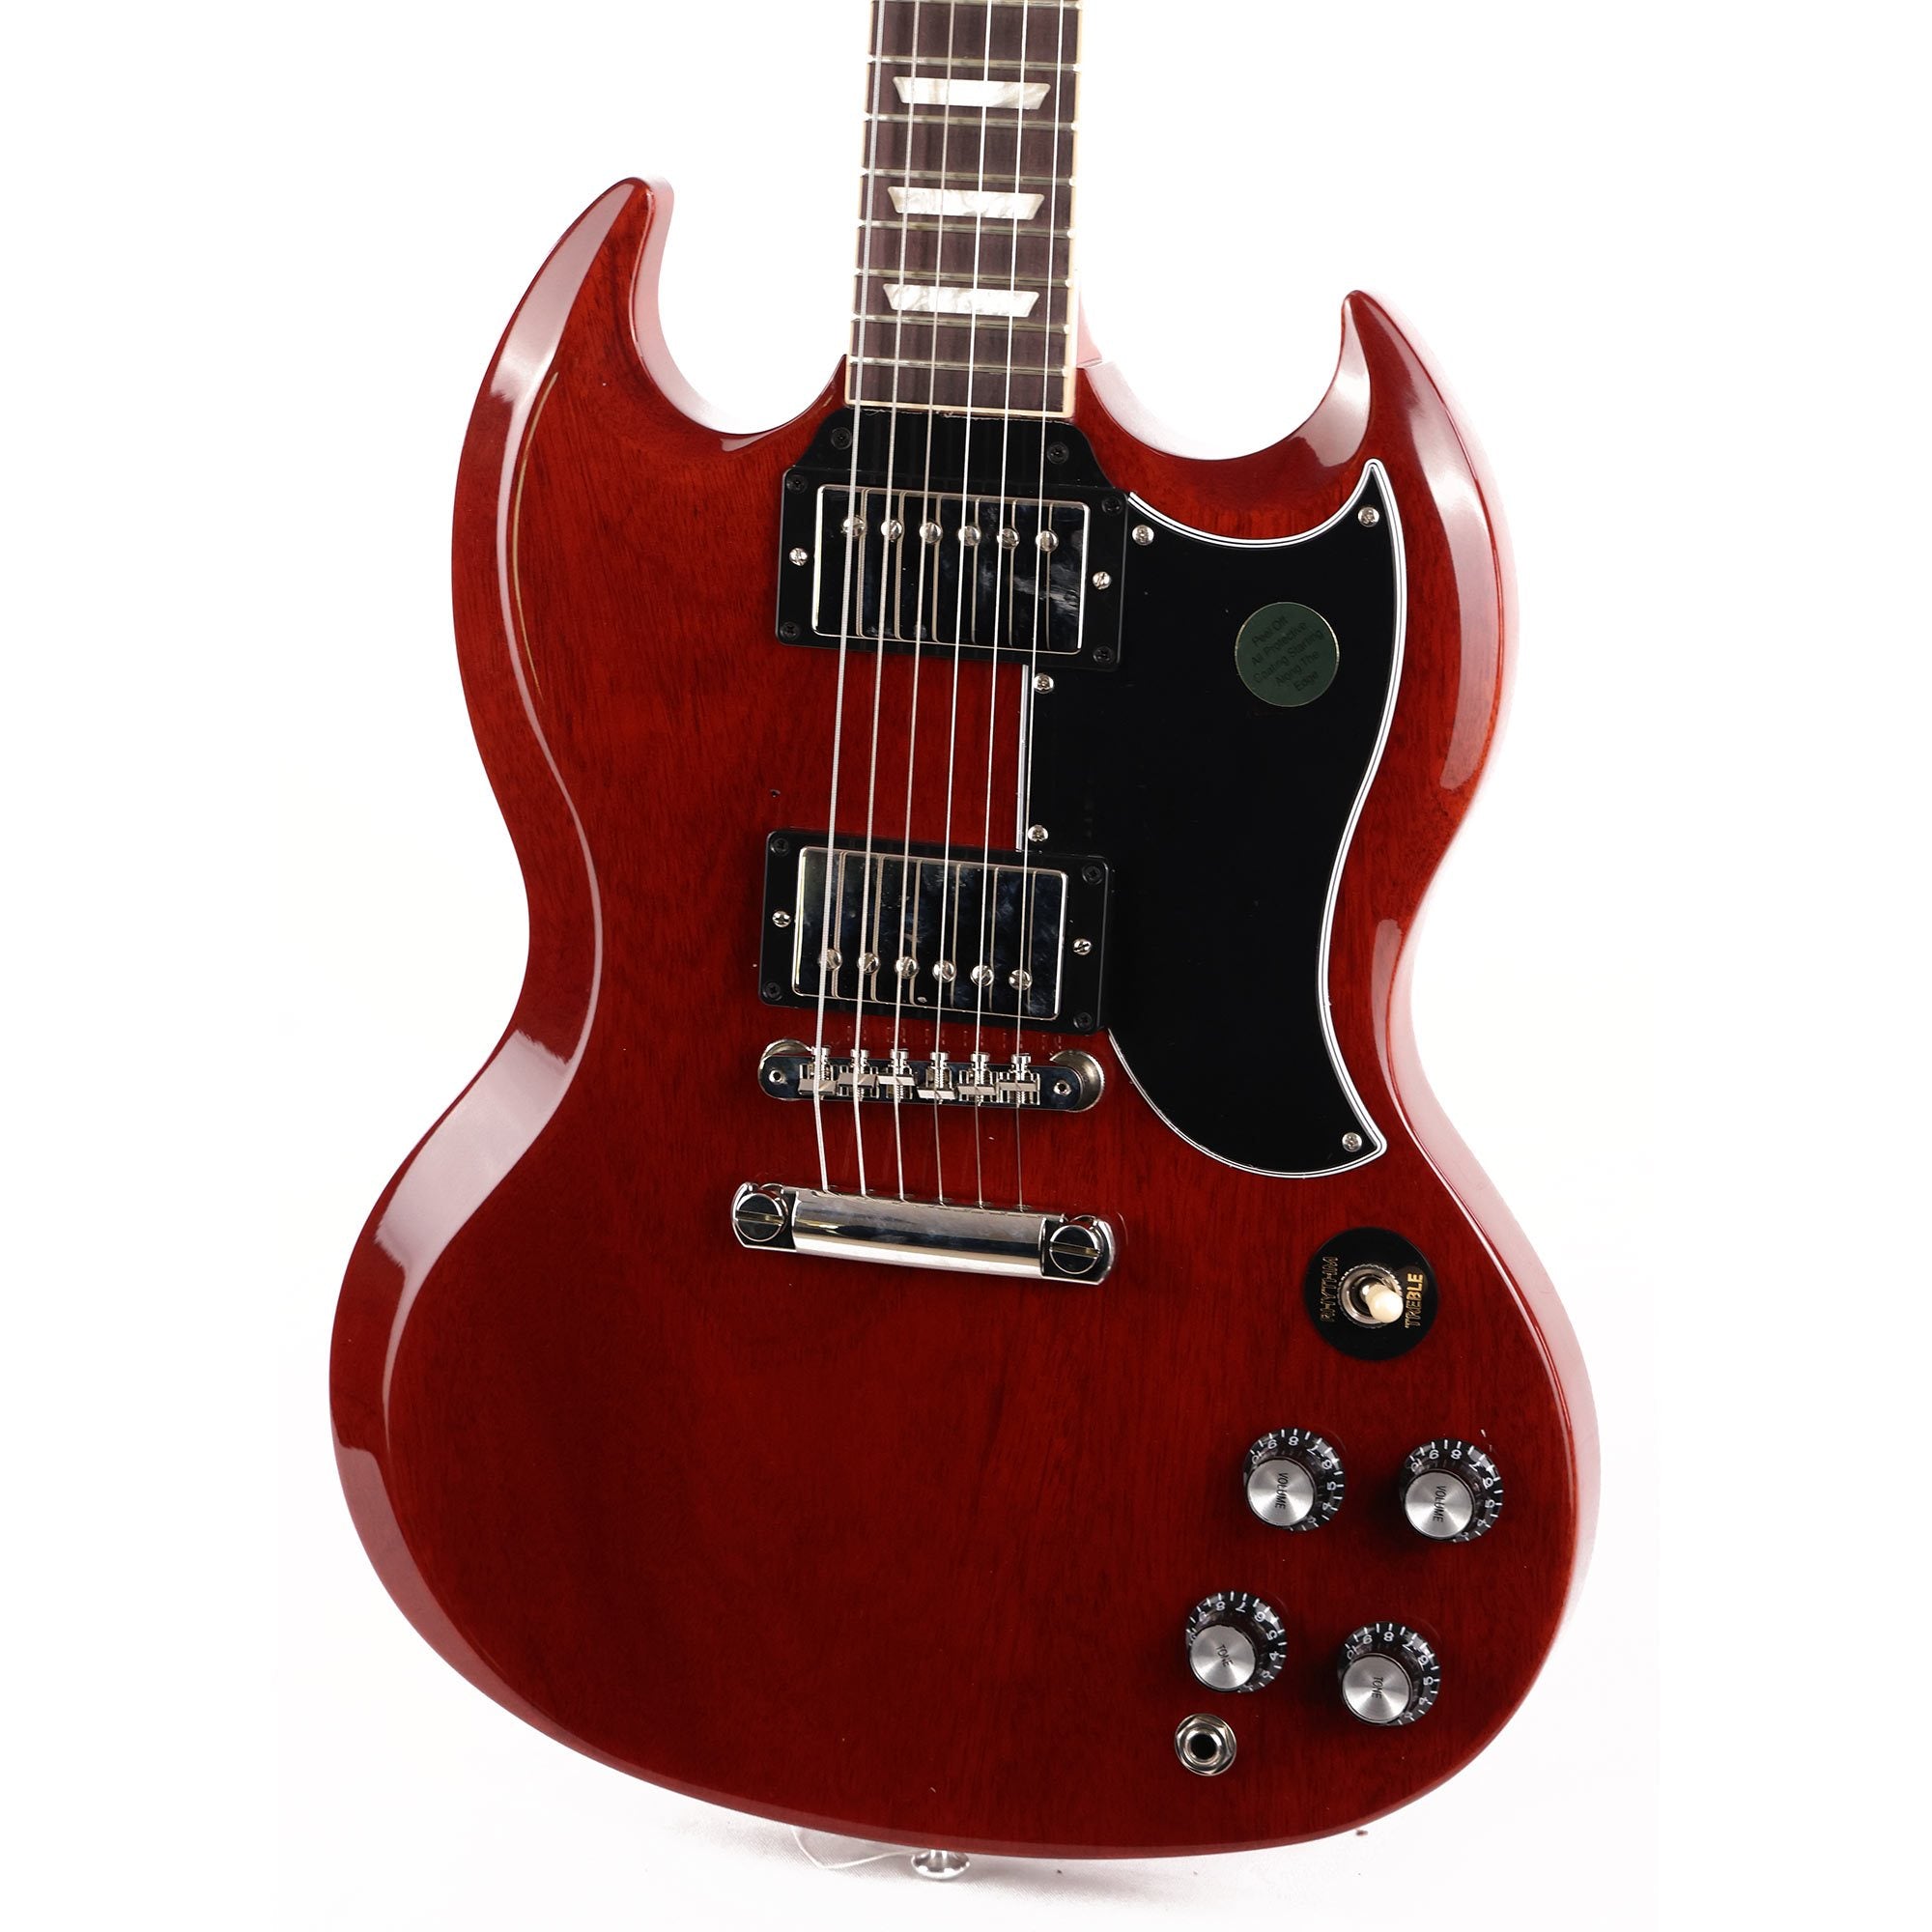 Gibson SG Standard '61 Vintage Cherry | The Music Zoo